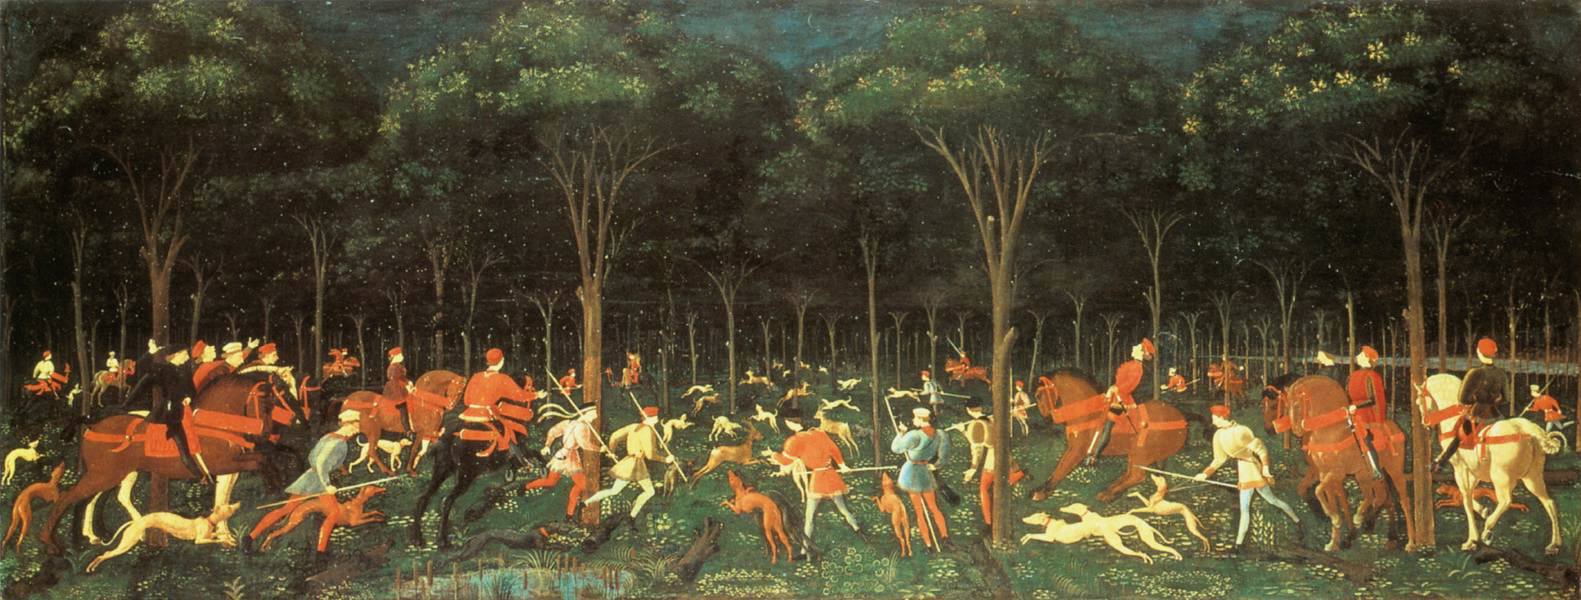 Ночная охота (The Hunt in the Forest) by Paolo Uccello - ок. 1470 - 65 см × 165 см 